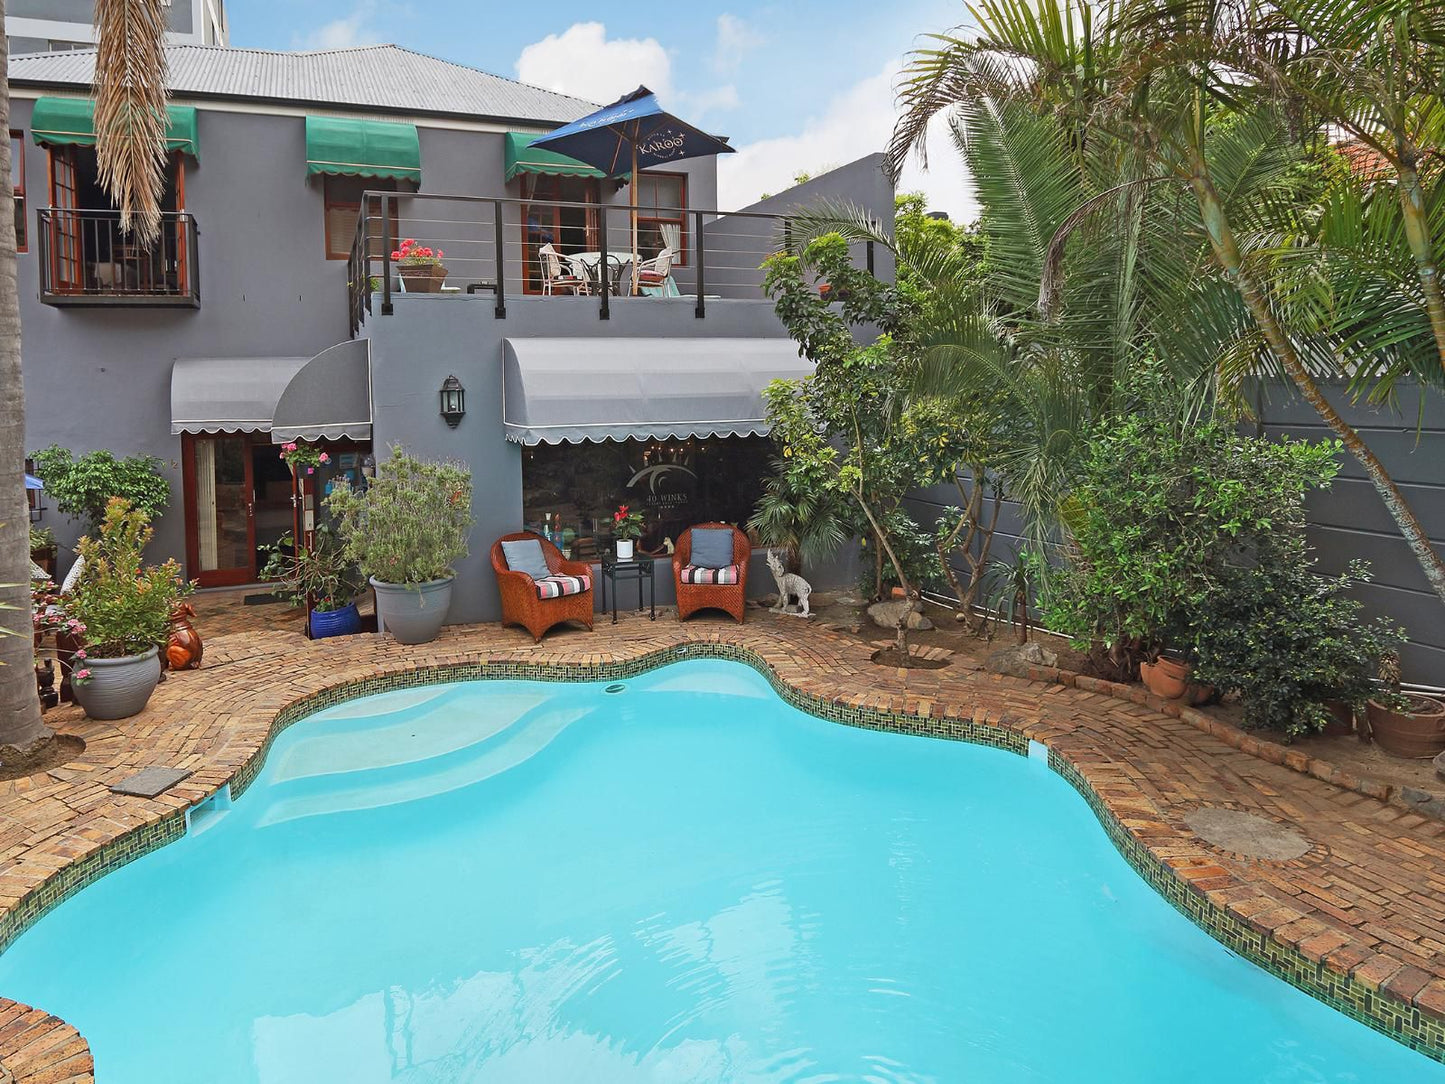 40 Winks Guest House Green Point Green Point Cape Town Western Cape South Africa Complementary Colors, House, Building, Architecture, Palm Tree, Plant, Nature, Wood, Garden, Swimming Pool